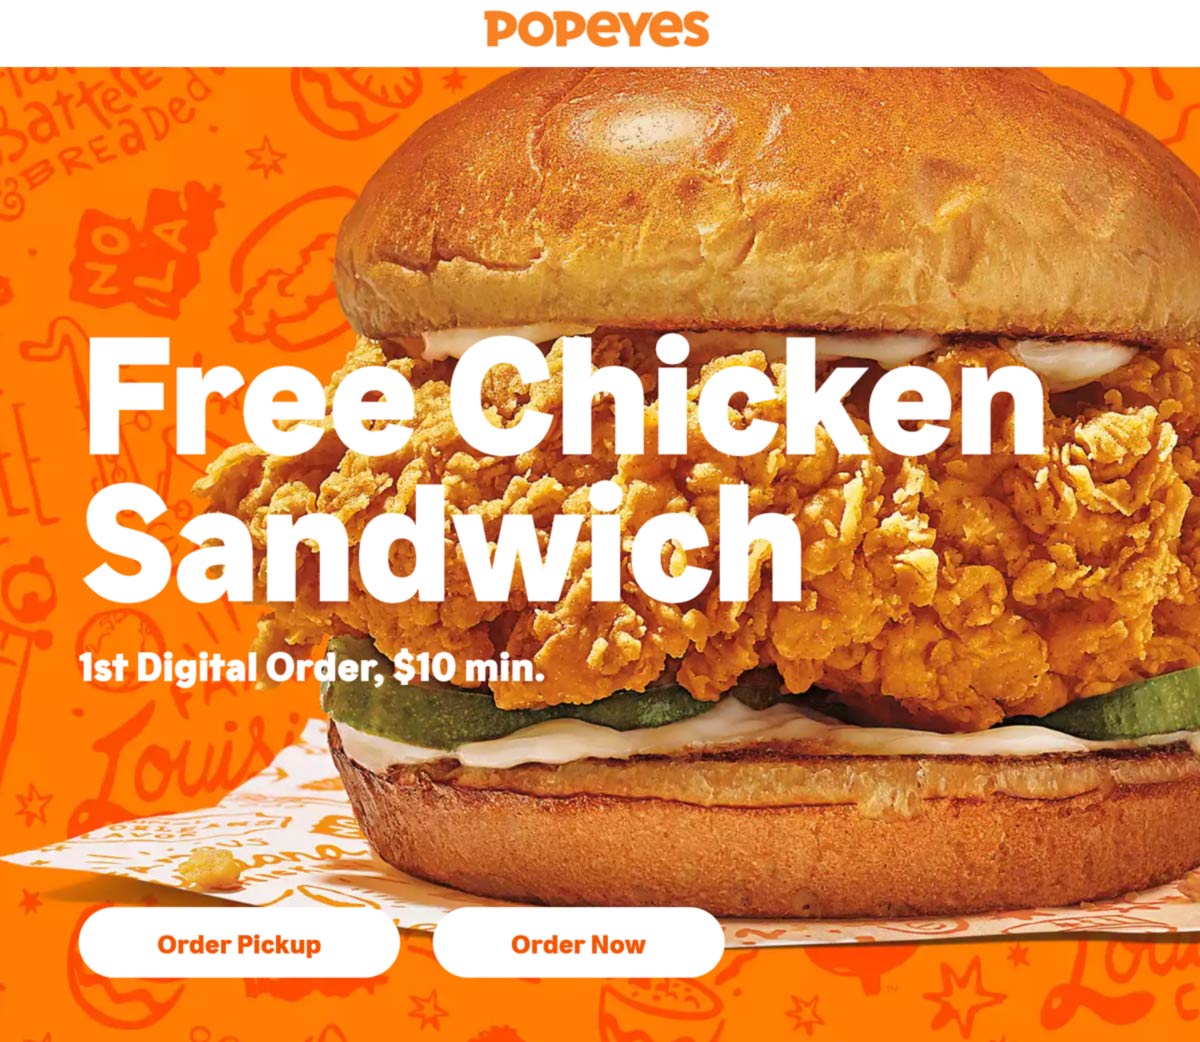 Free chicken sandwich with first 10 digitally spent at Popeyes 